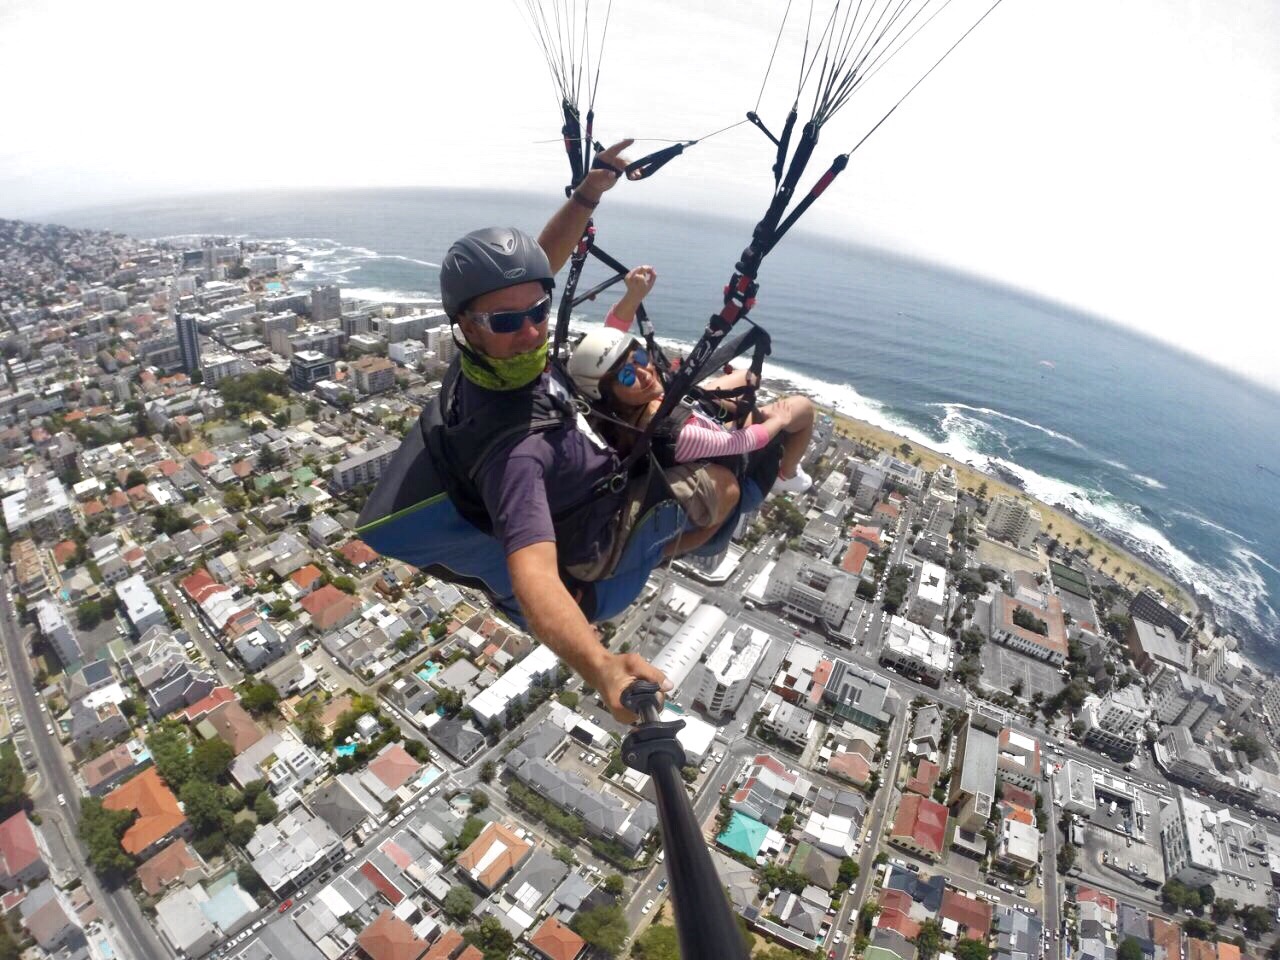 Exhilarating Tandem Paragliding from Signal Hill with amazing views over Cape Town